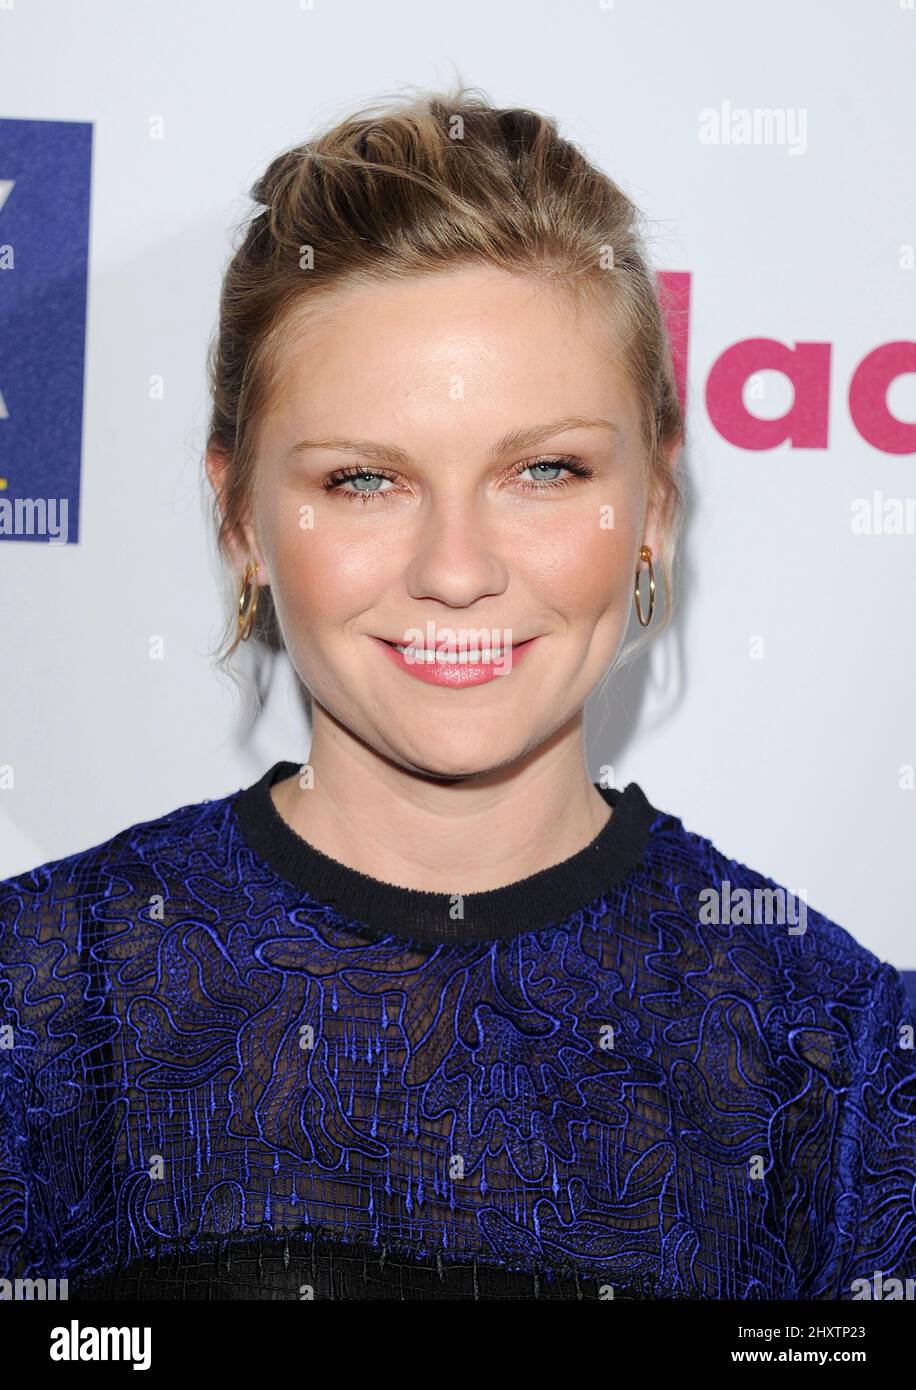 Kirsten Dunst attending the 22nd Glaad Media Awards at the Westin Bonaventure Hotel in Downtown, Los Angeles, USA. Stock Photo